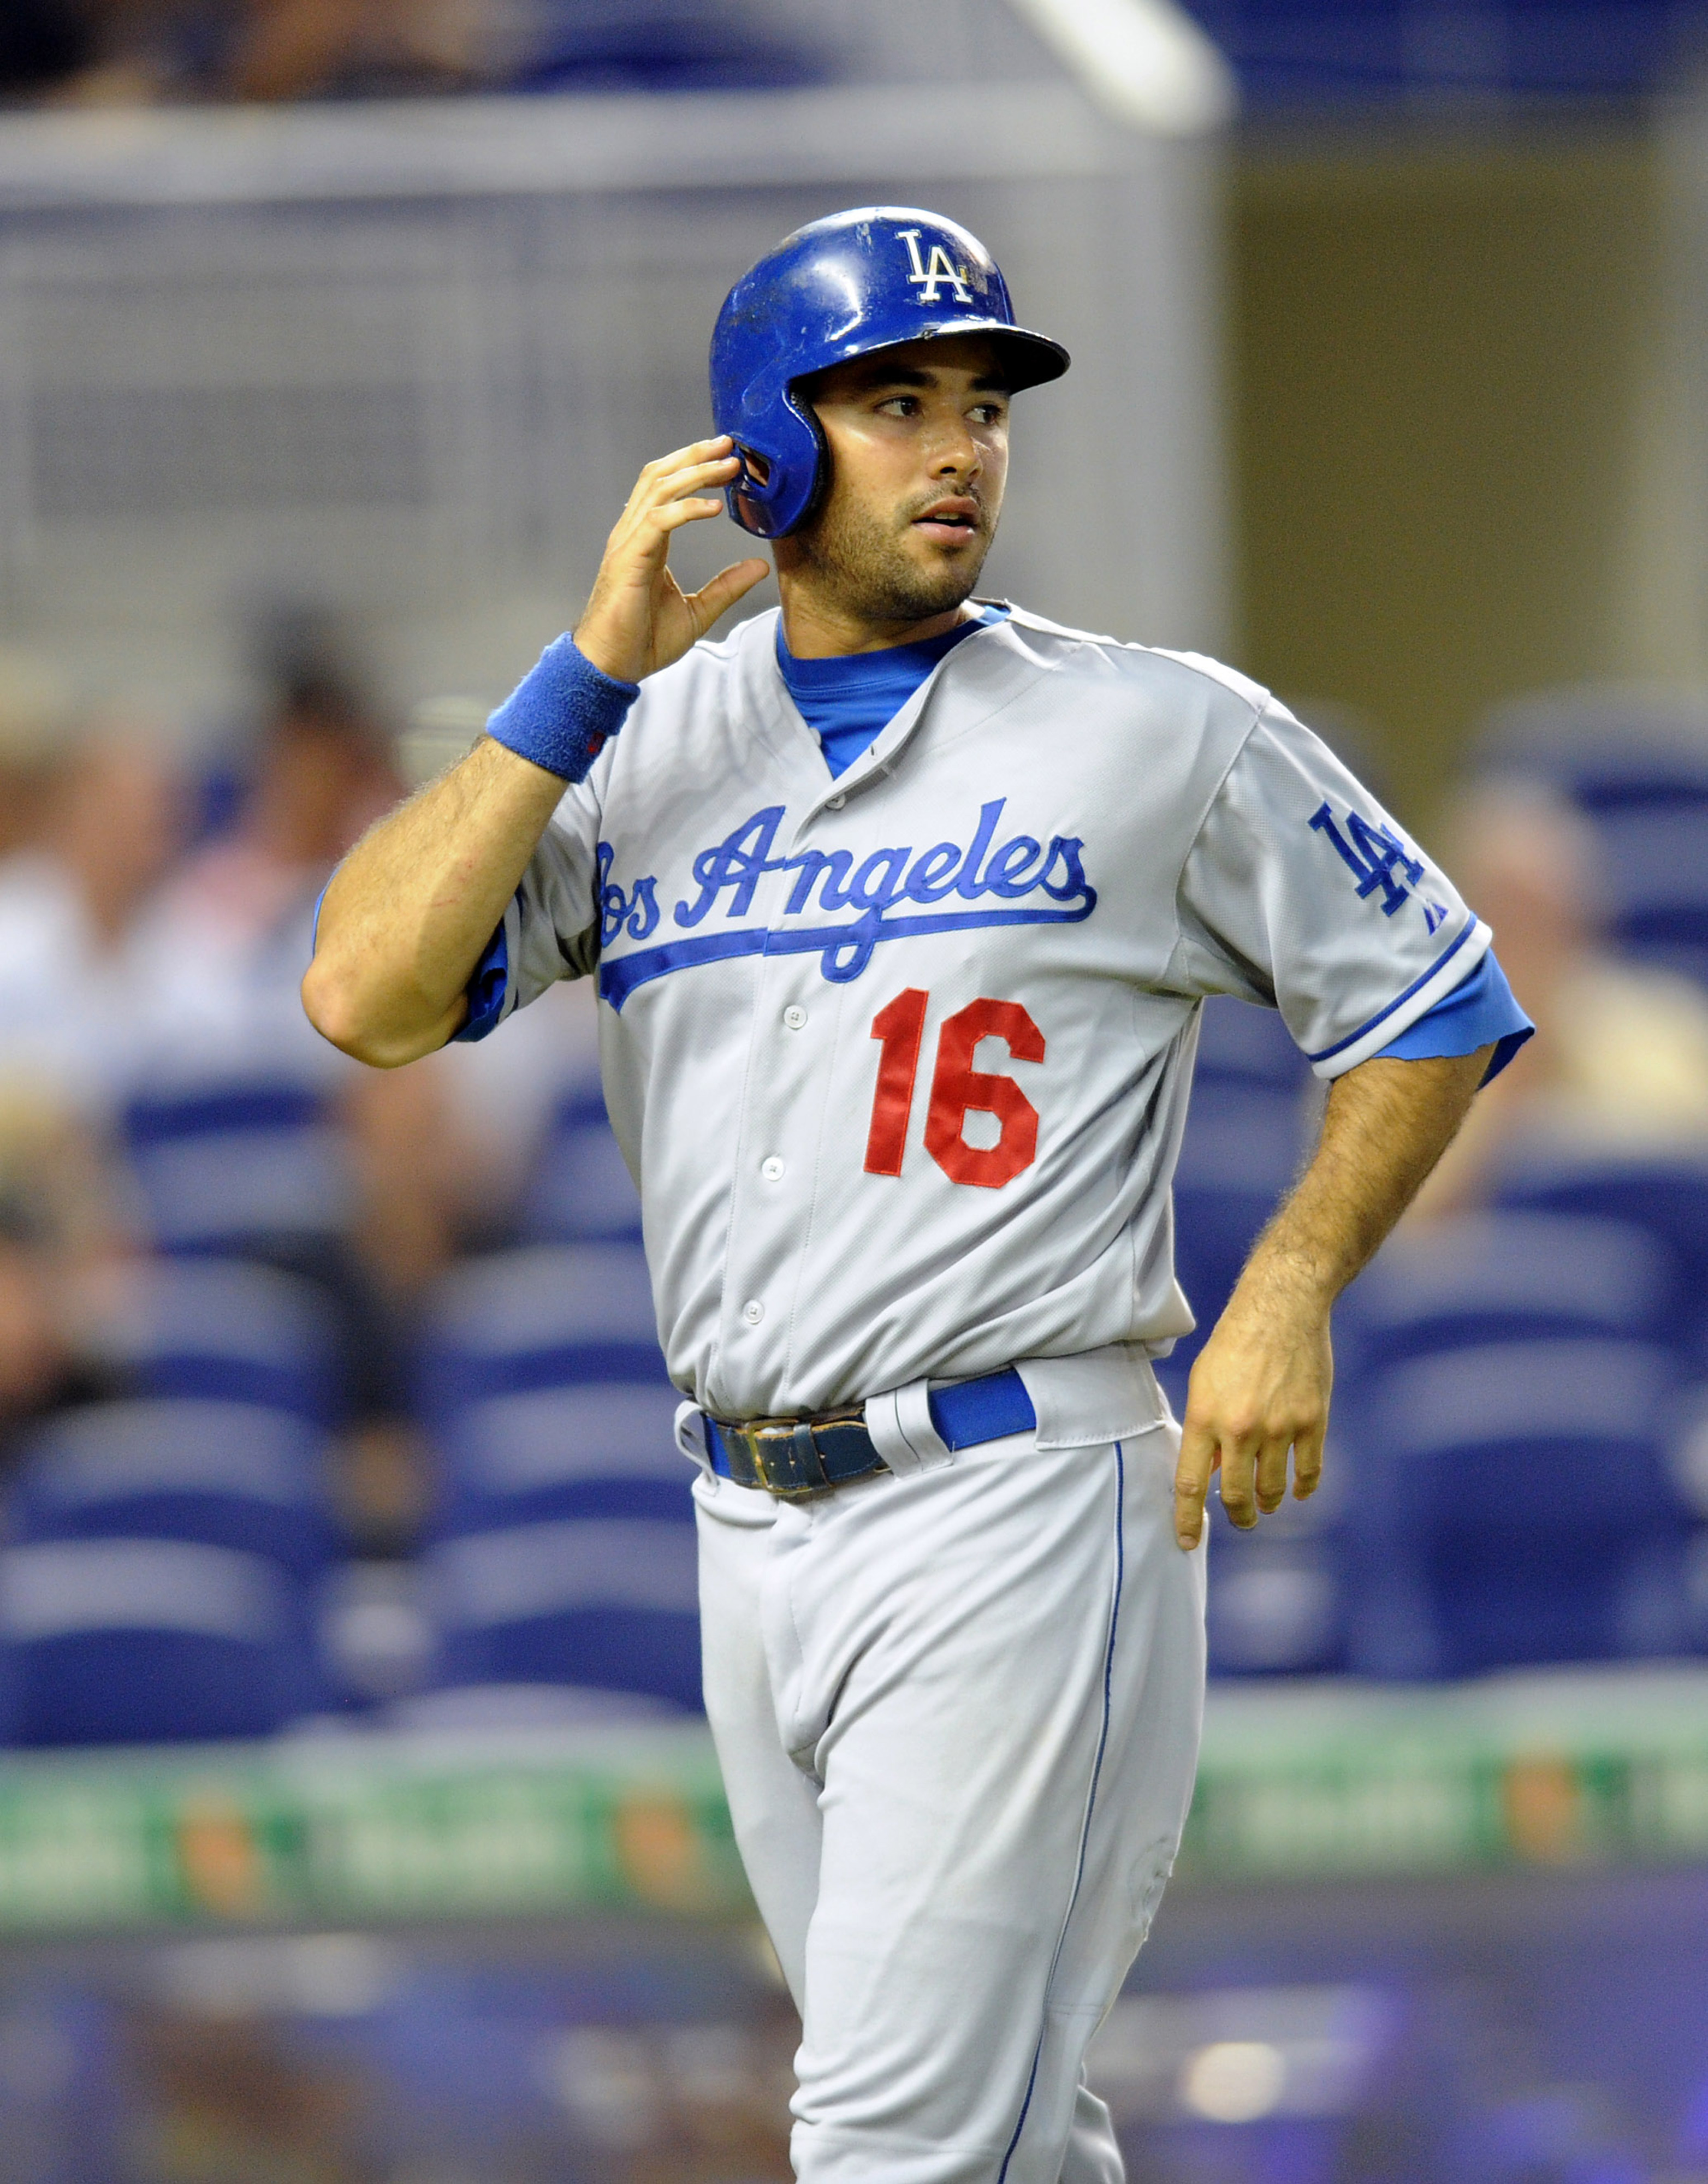 Andre Ethier hasn't been blistering the ball against lefties this season.